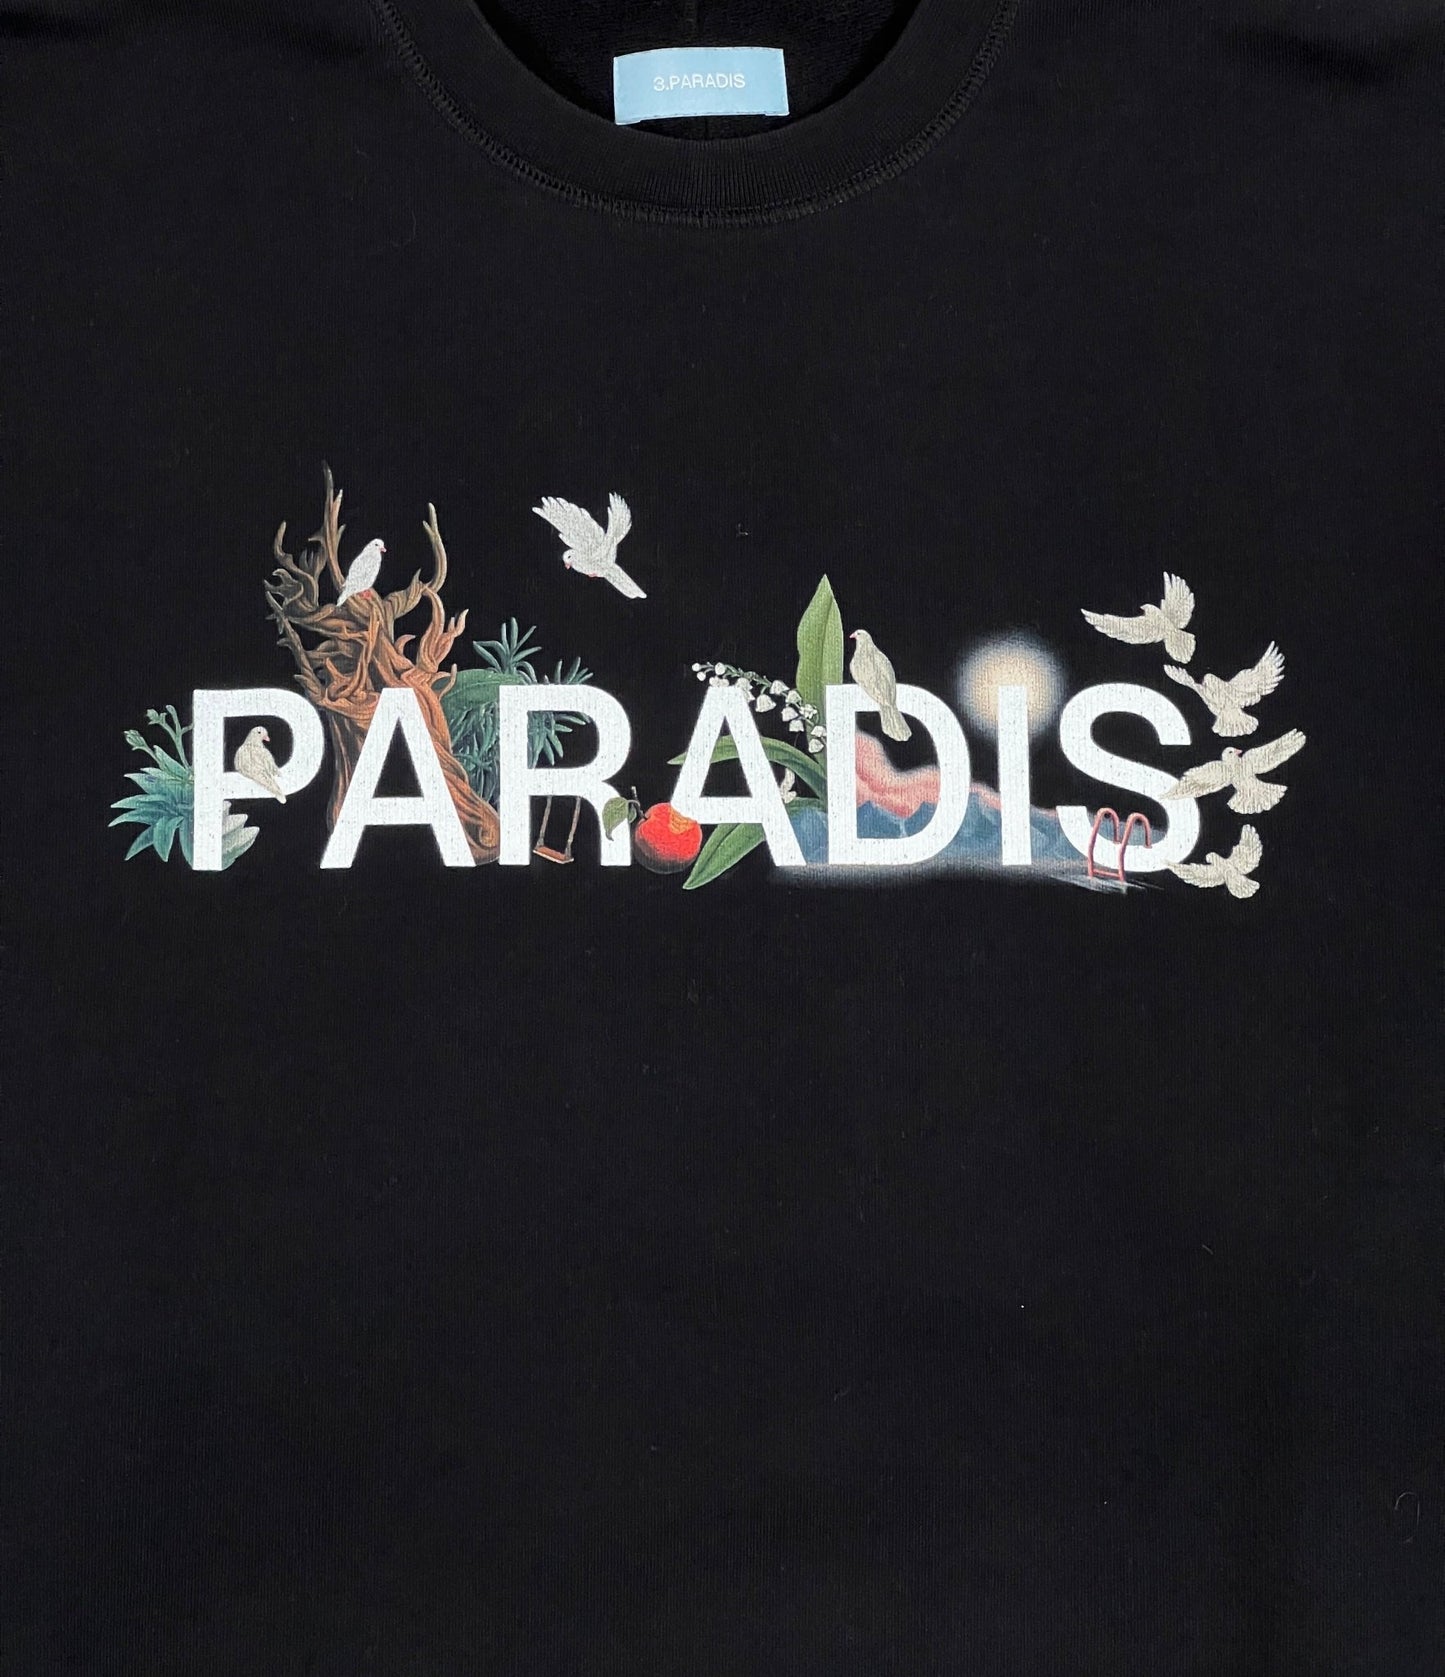 A black cotton 3.PARADIS crewneck sweater with the word 3.PARADIS on it.